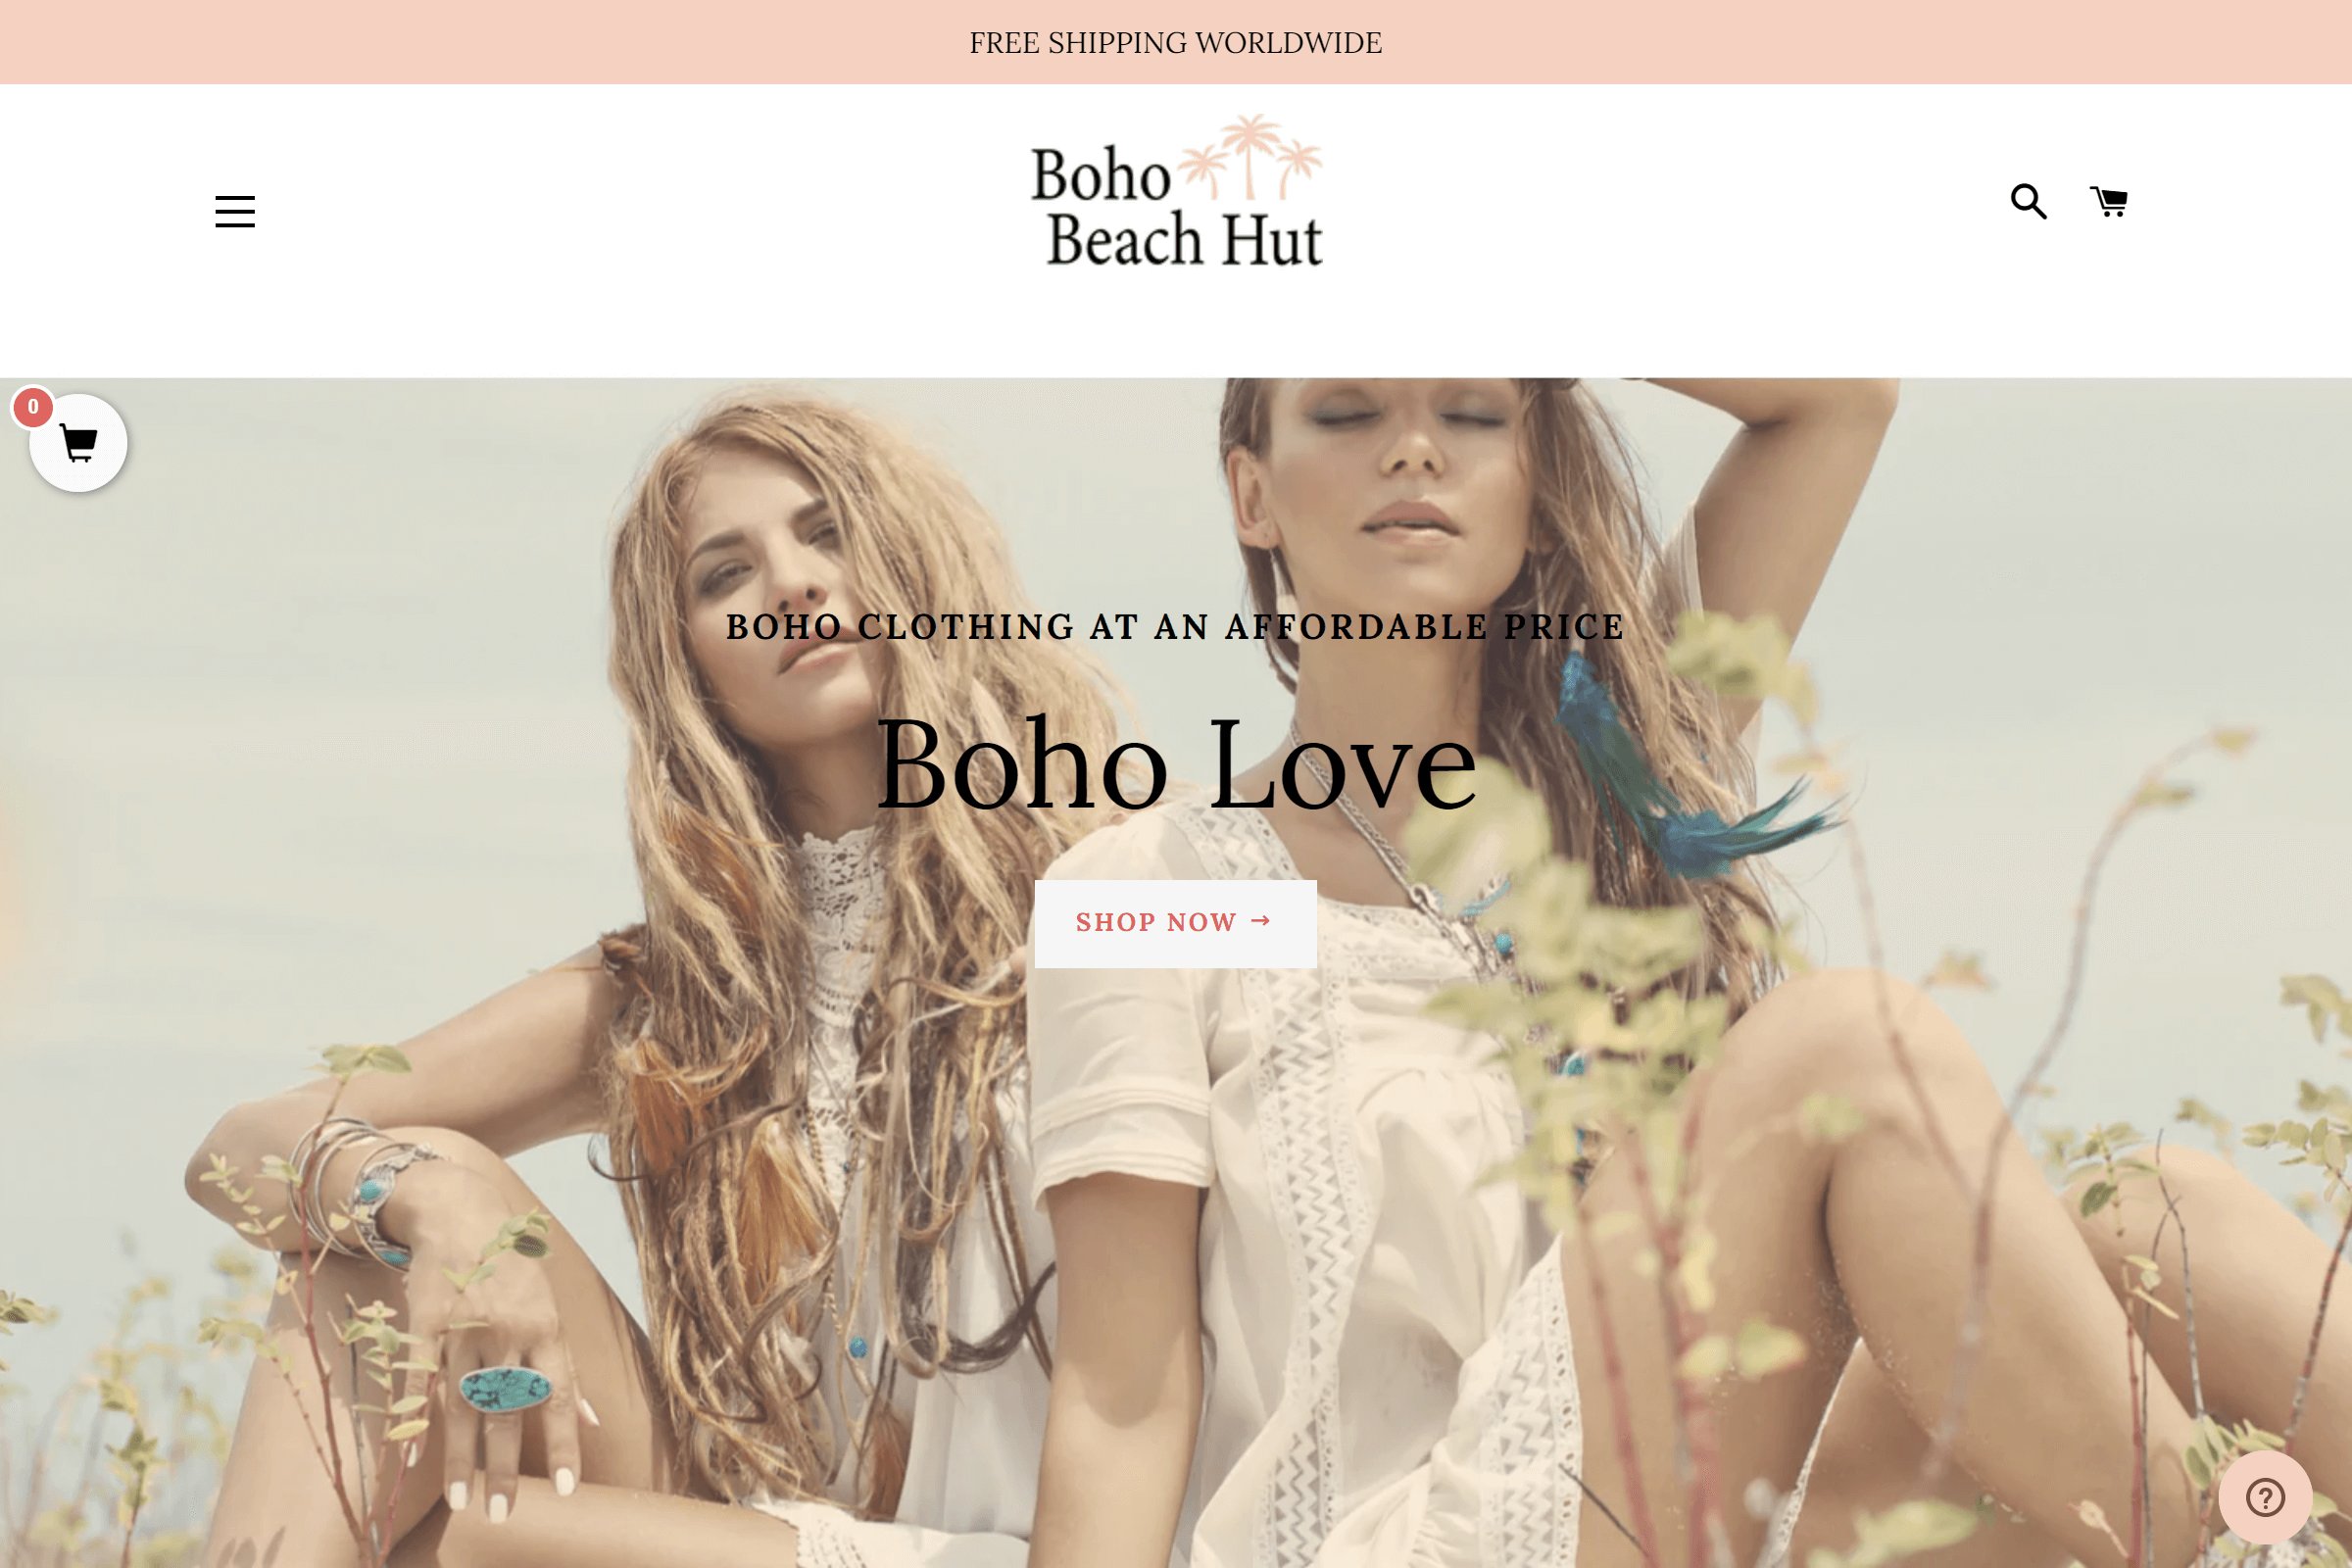 Boho Beach Hut on ReadSomeReviews